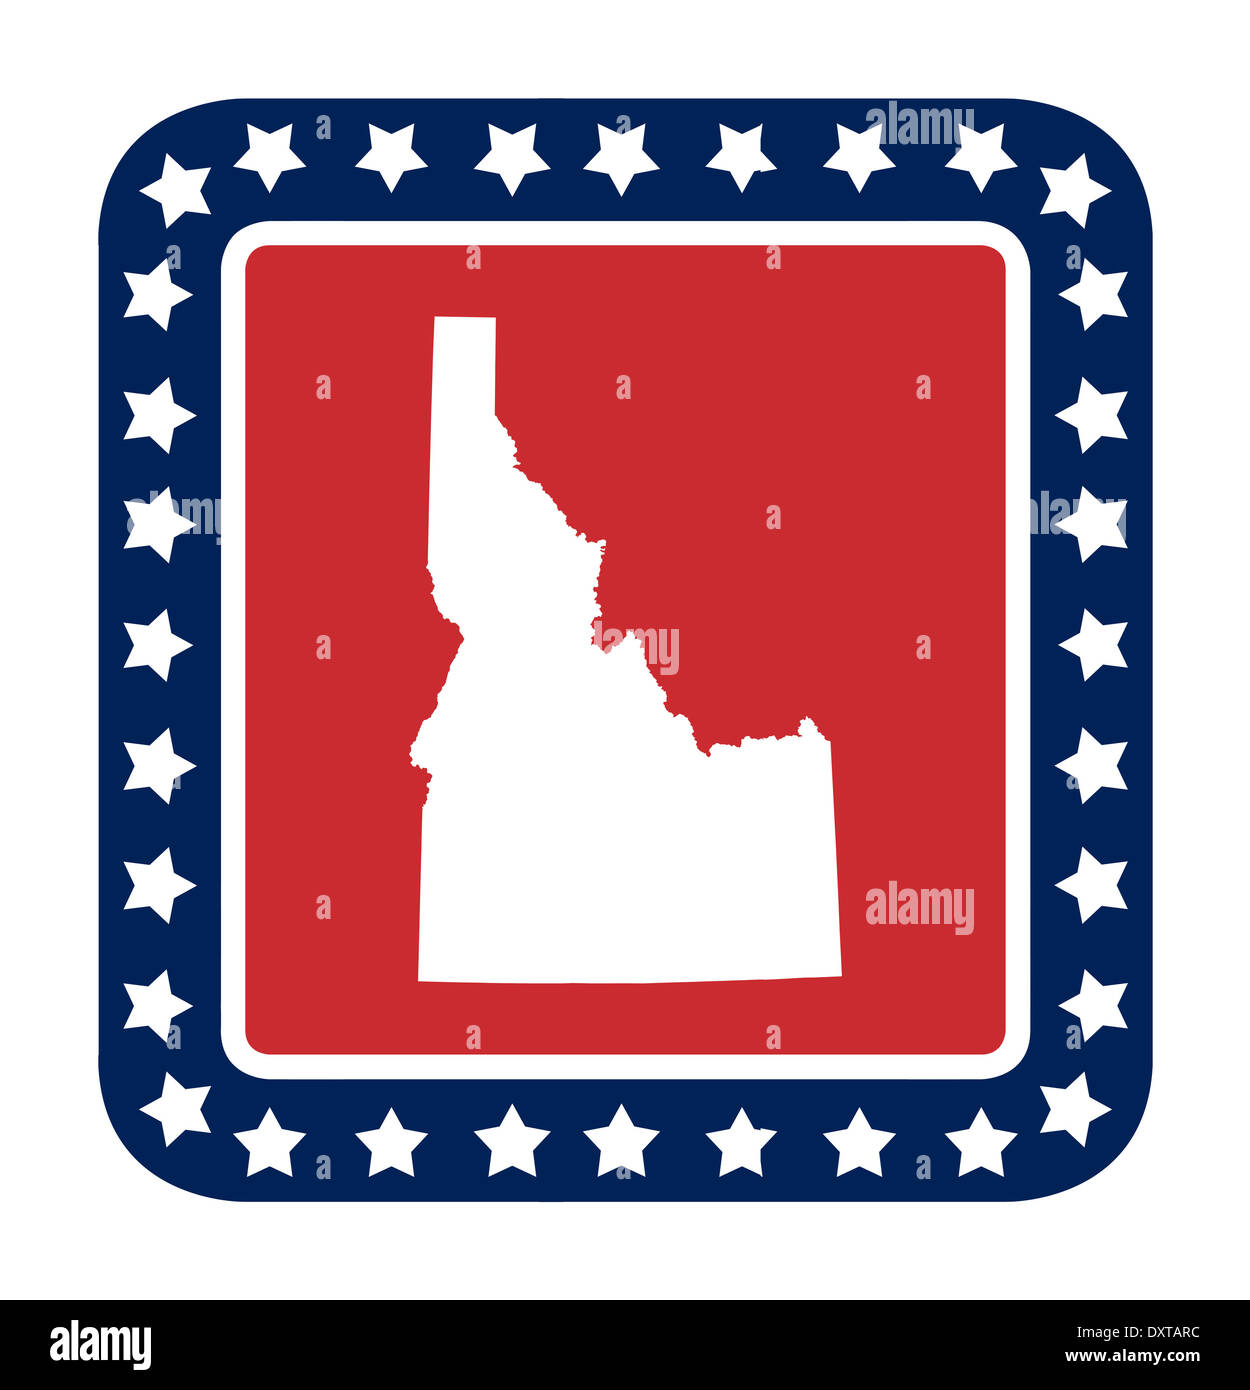 Idaho state button on American flag in flat web design style, isolated on white background. Stock Photo